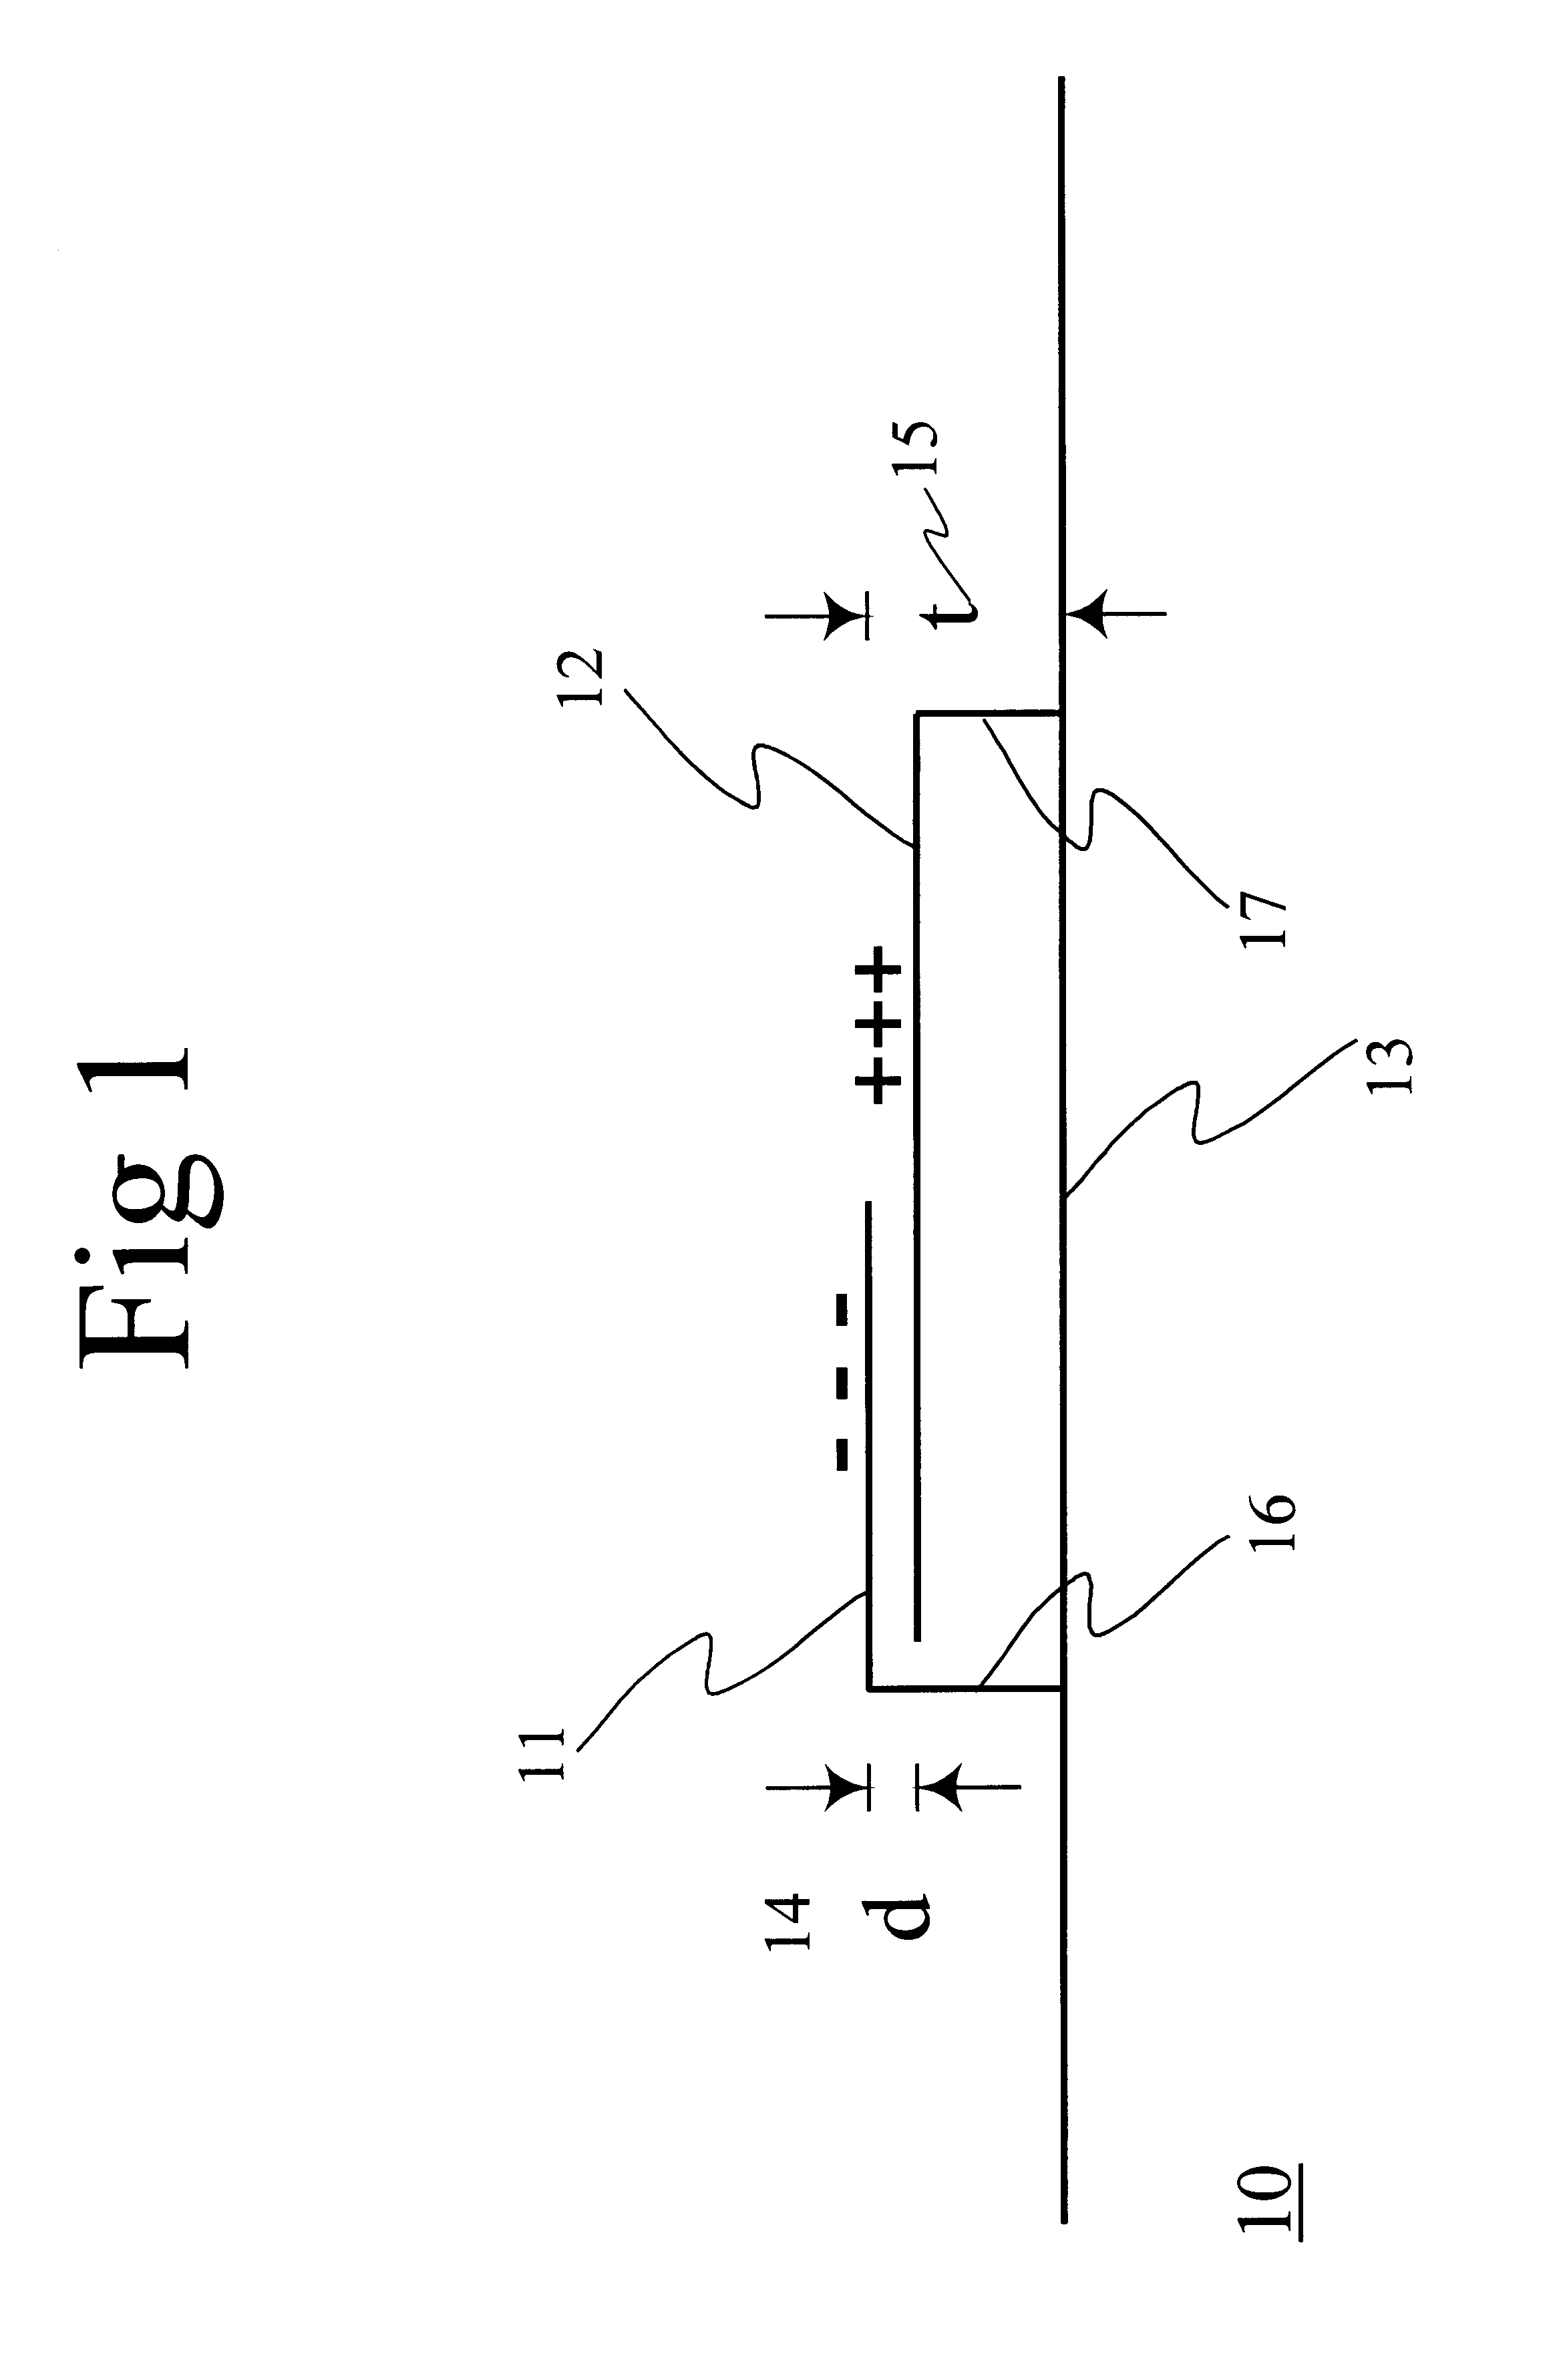 Magnetic dipole antenna structure and method